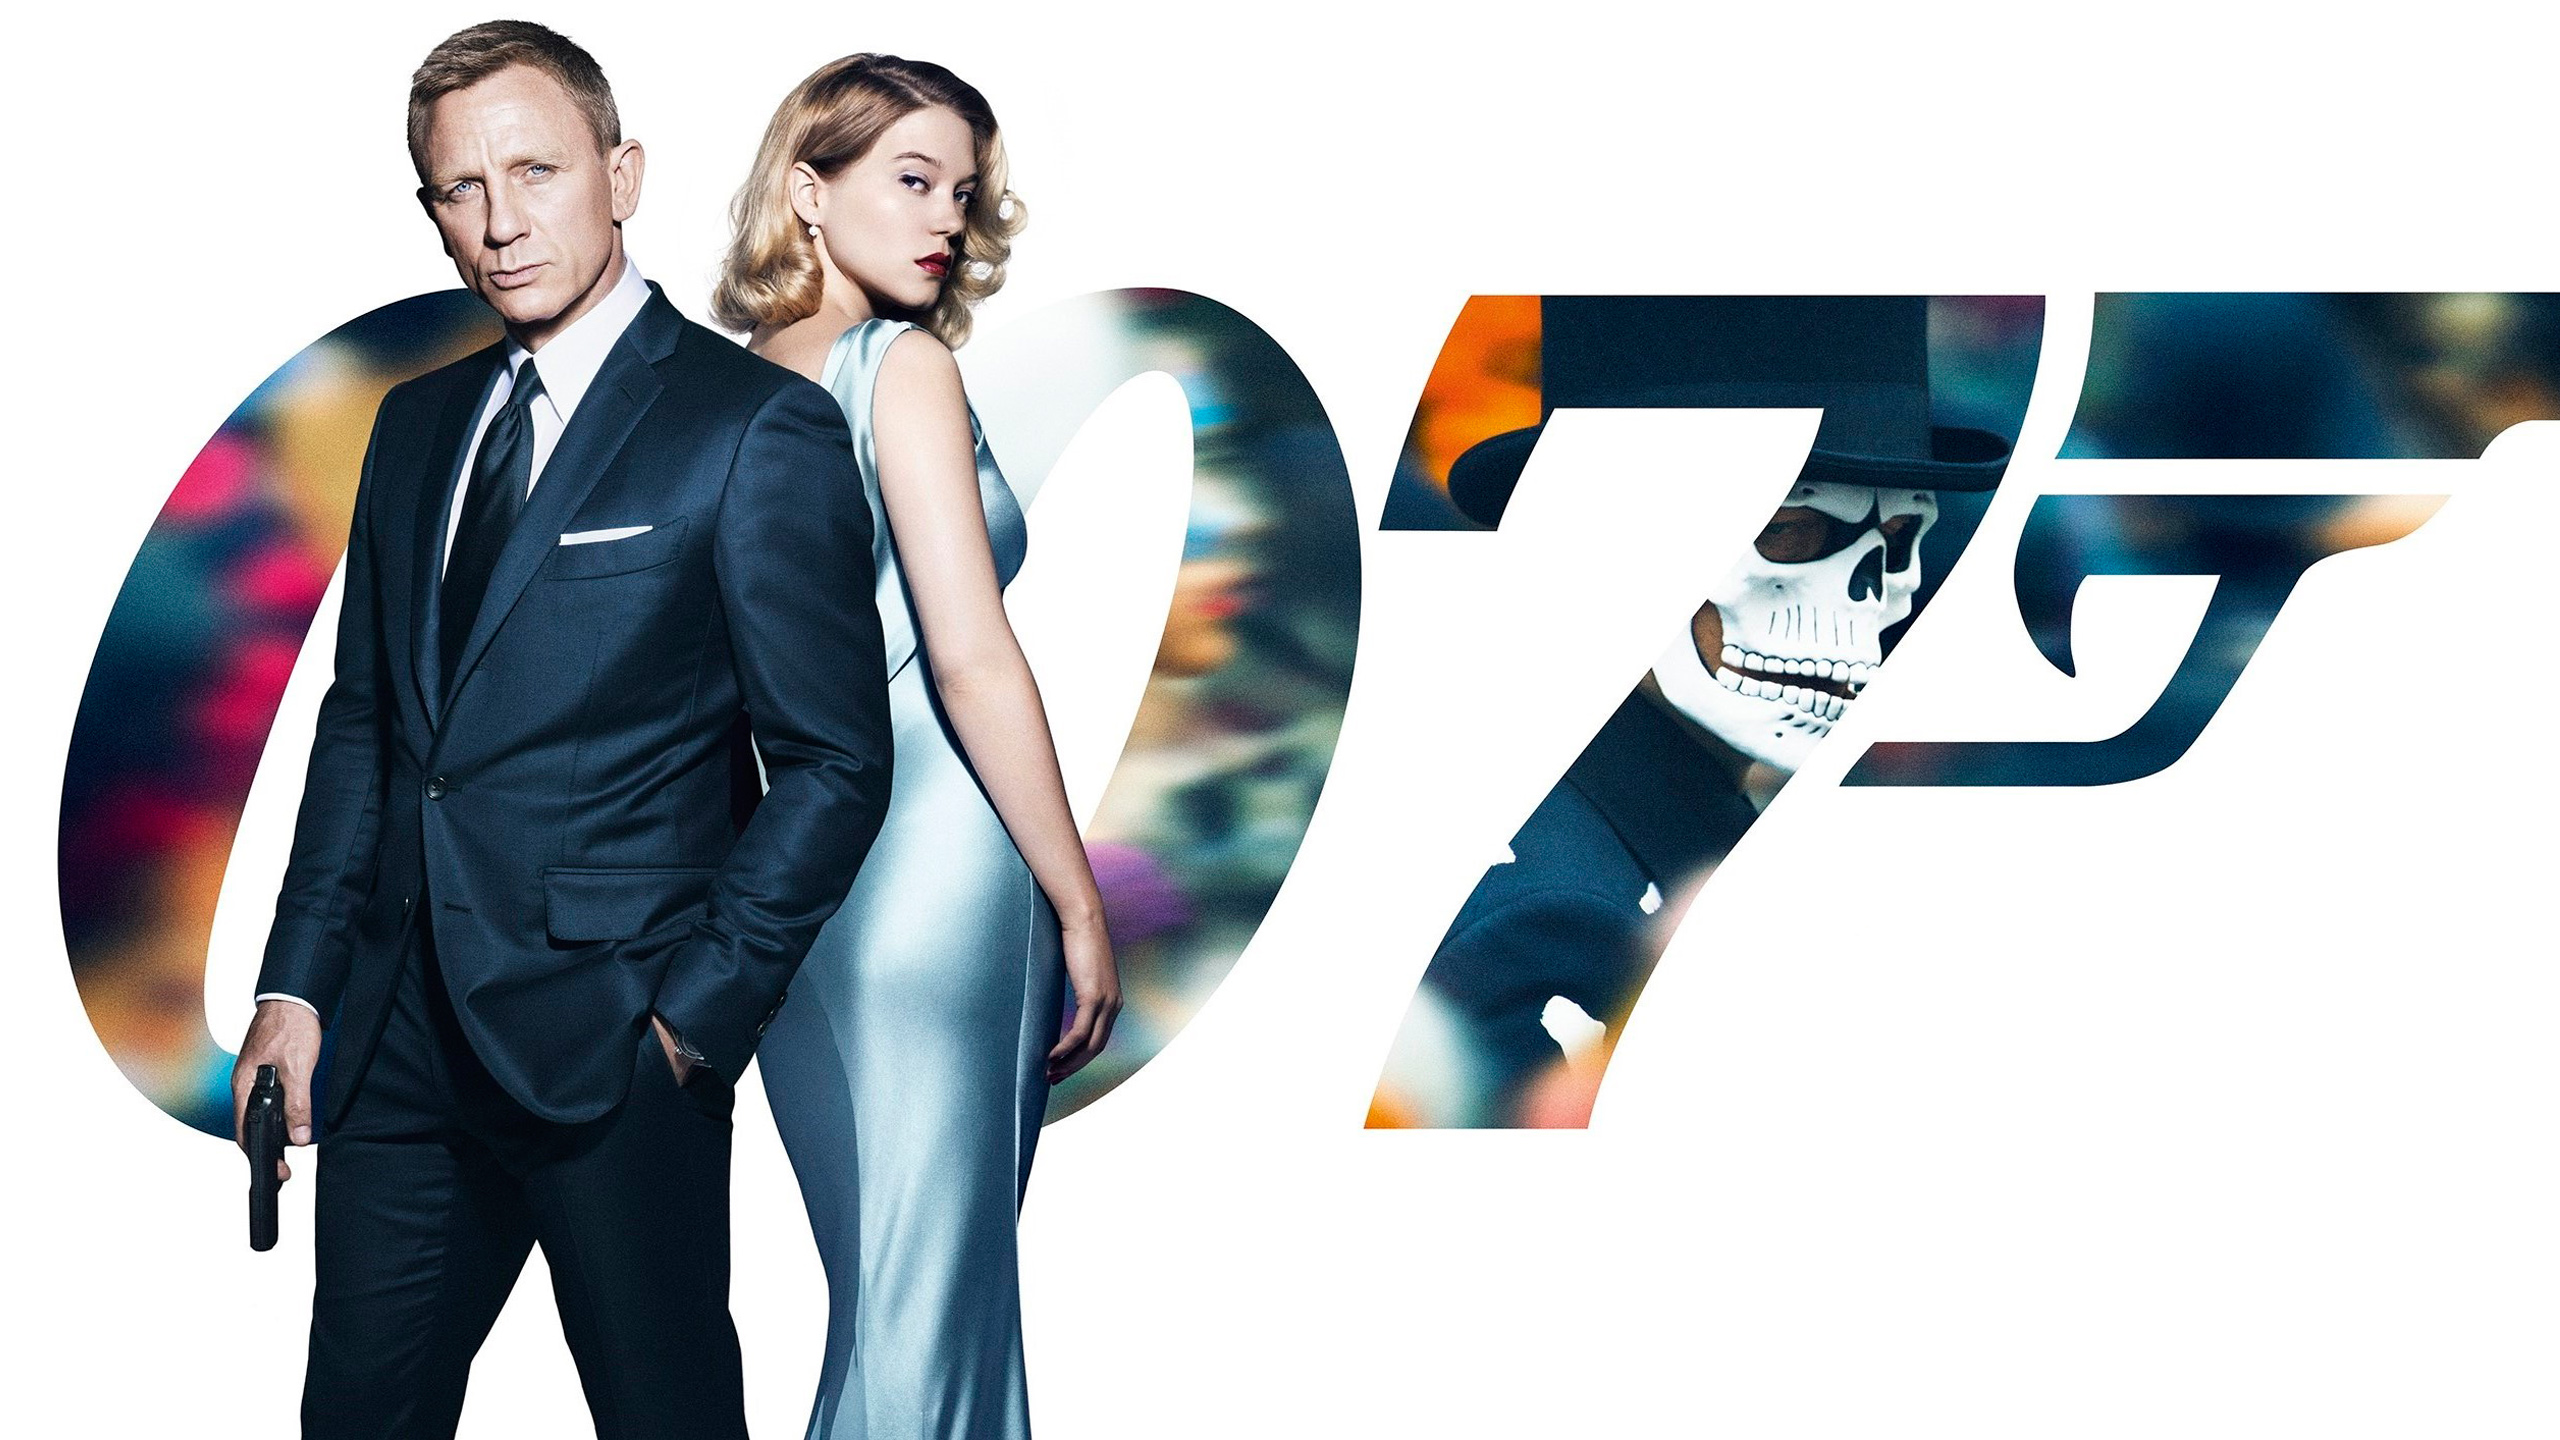 Spectre 4K wallpaper for your desktop or mobile screen free and easy to download